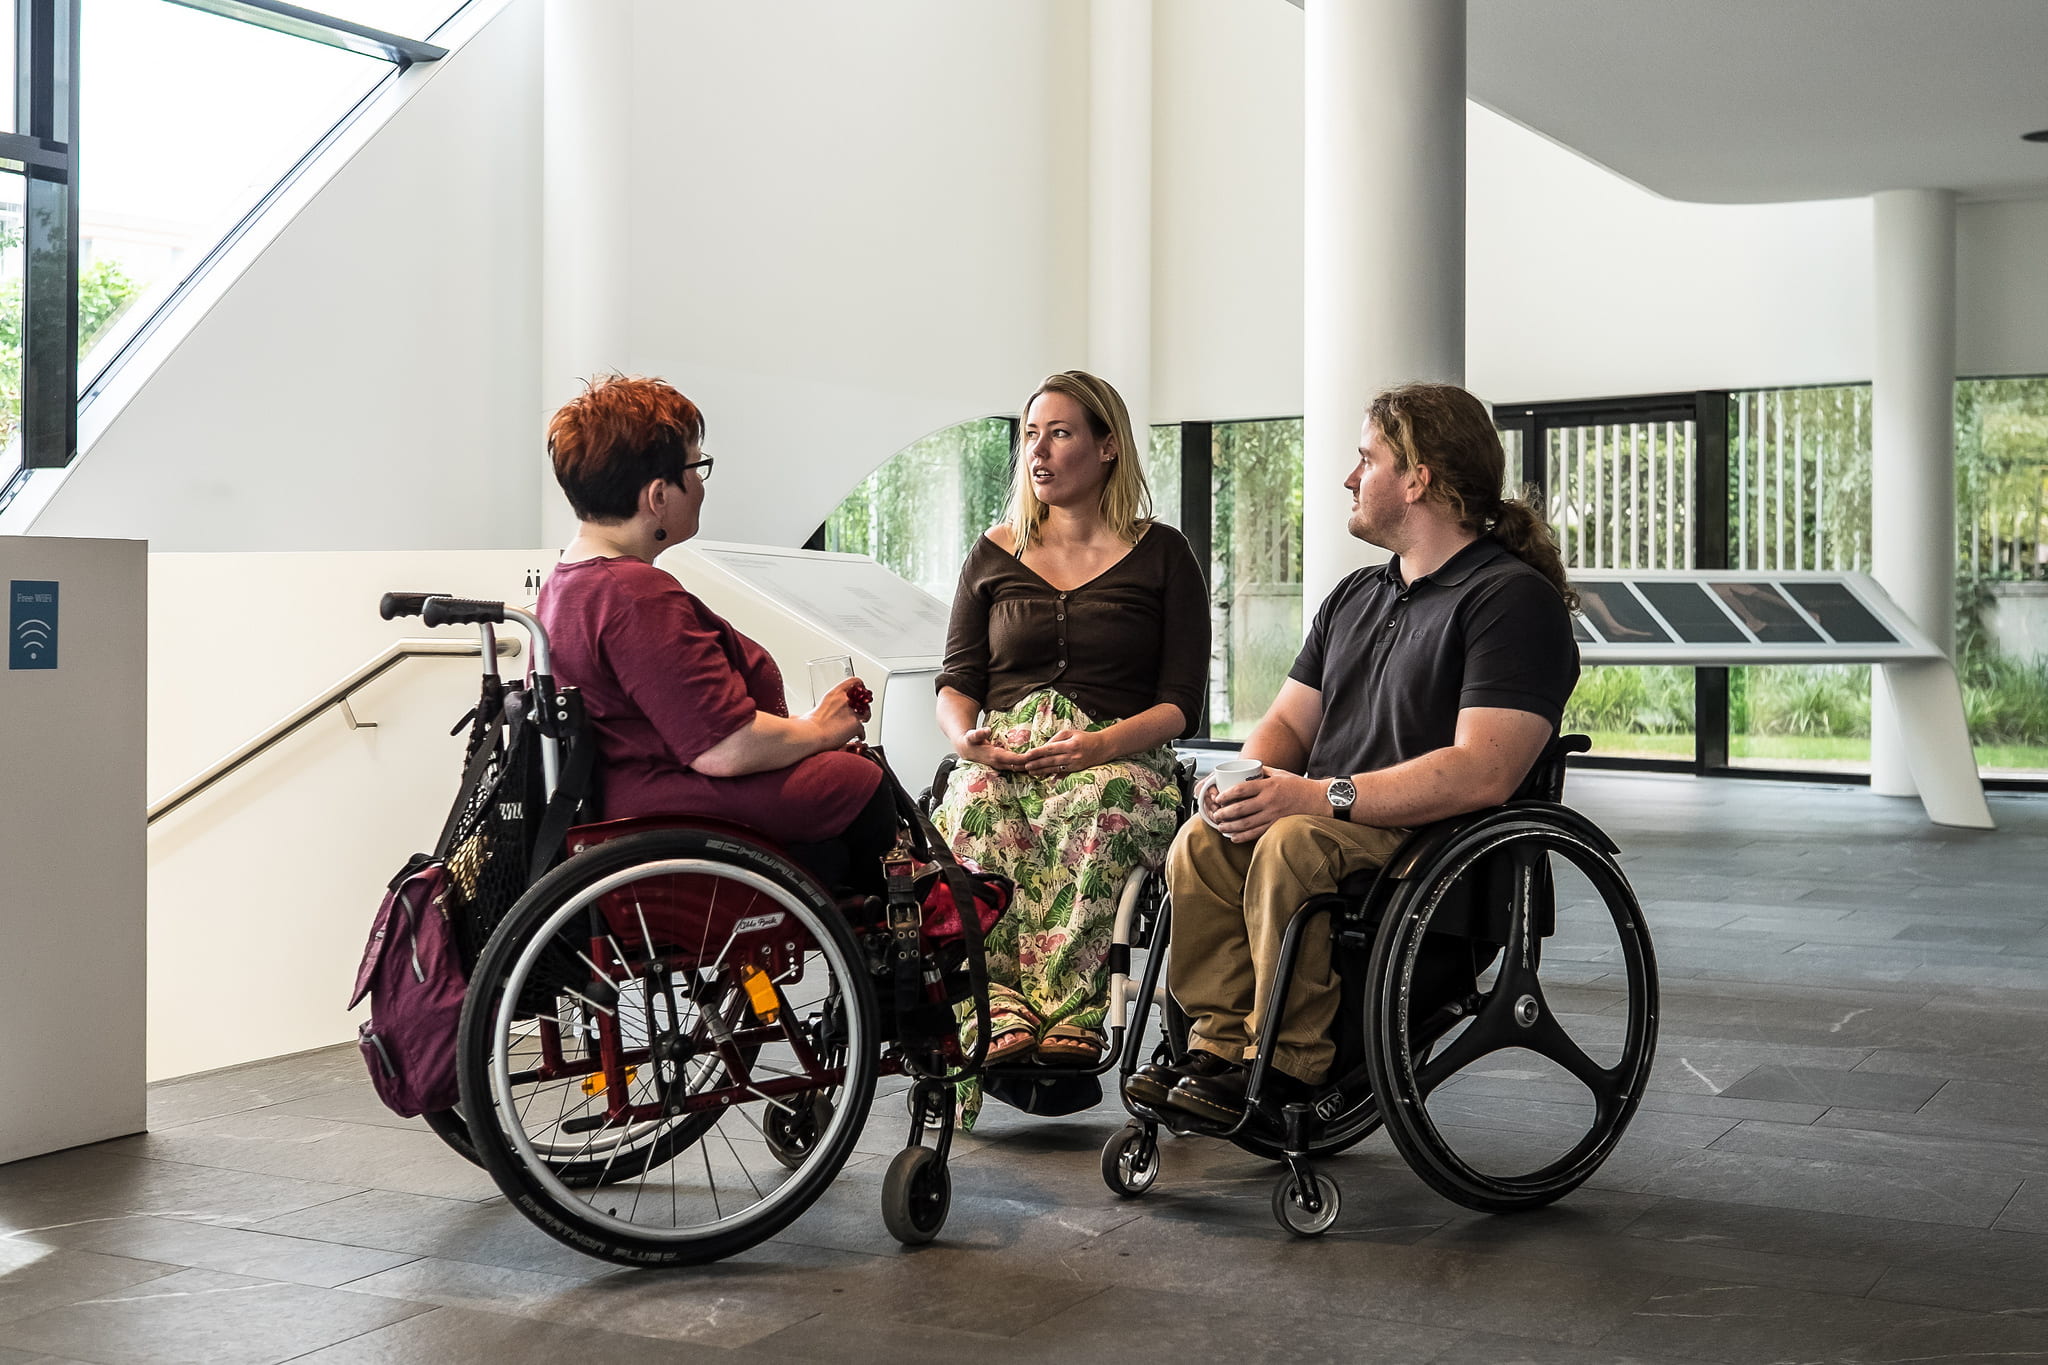 Three people in wheelchairs face each other while talking.